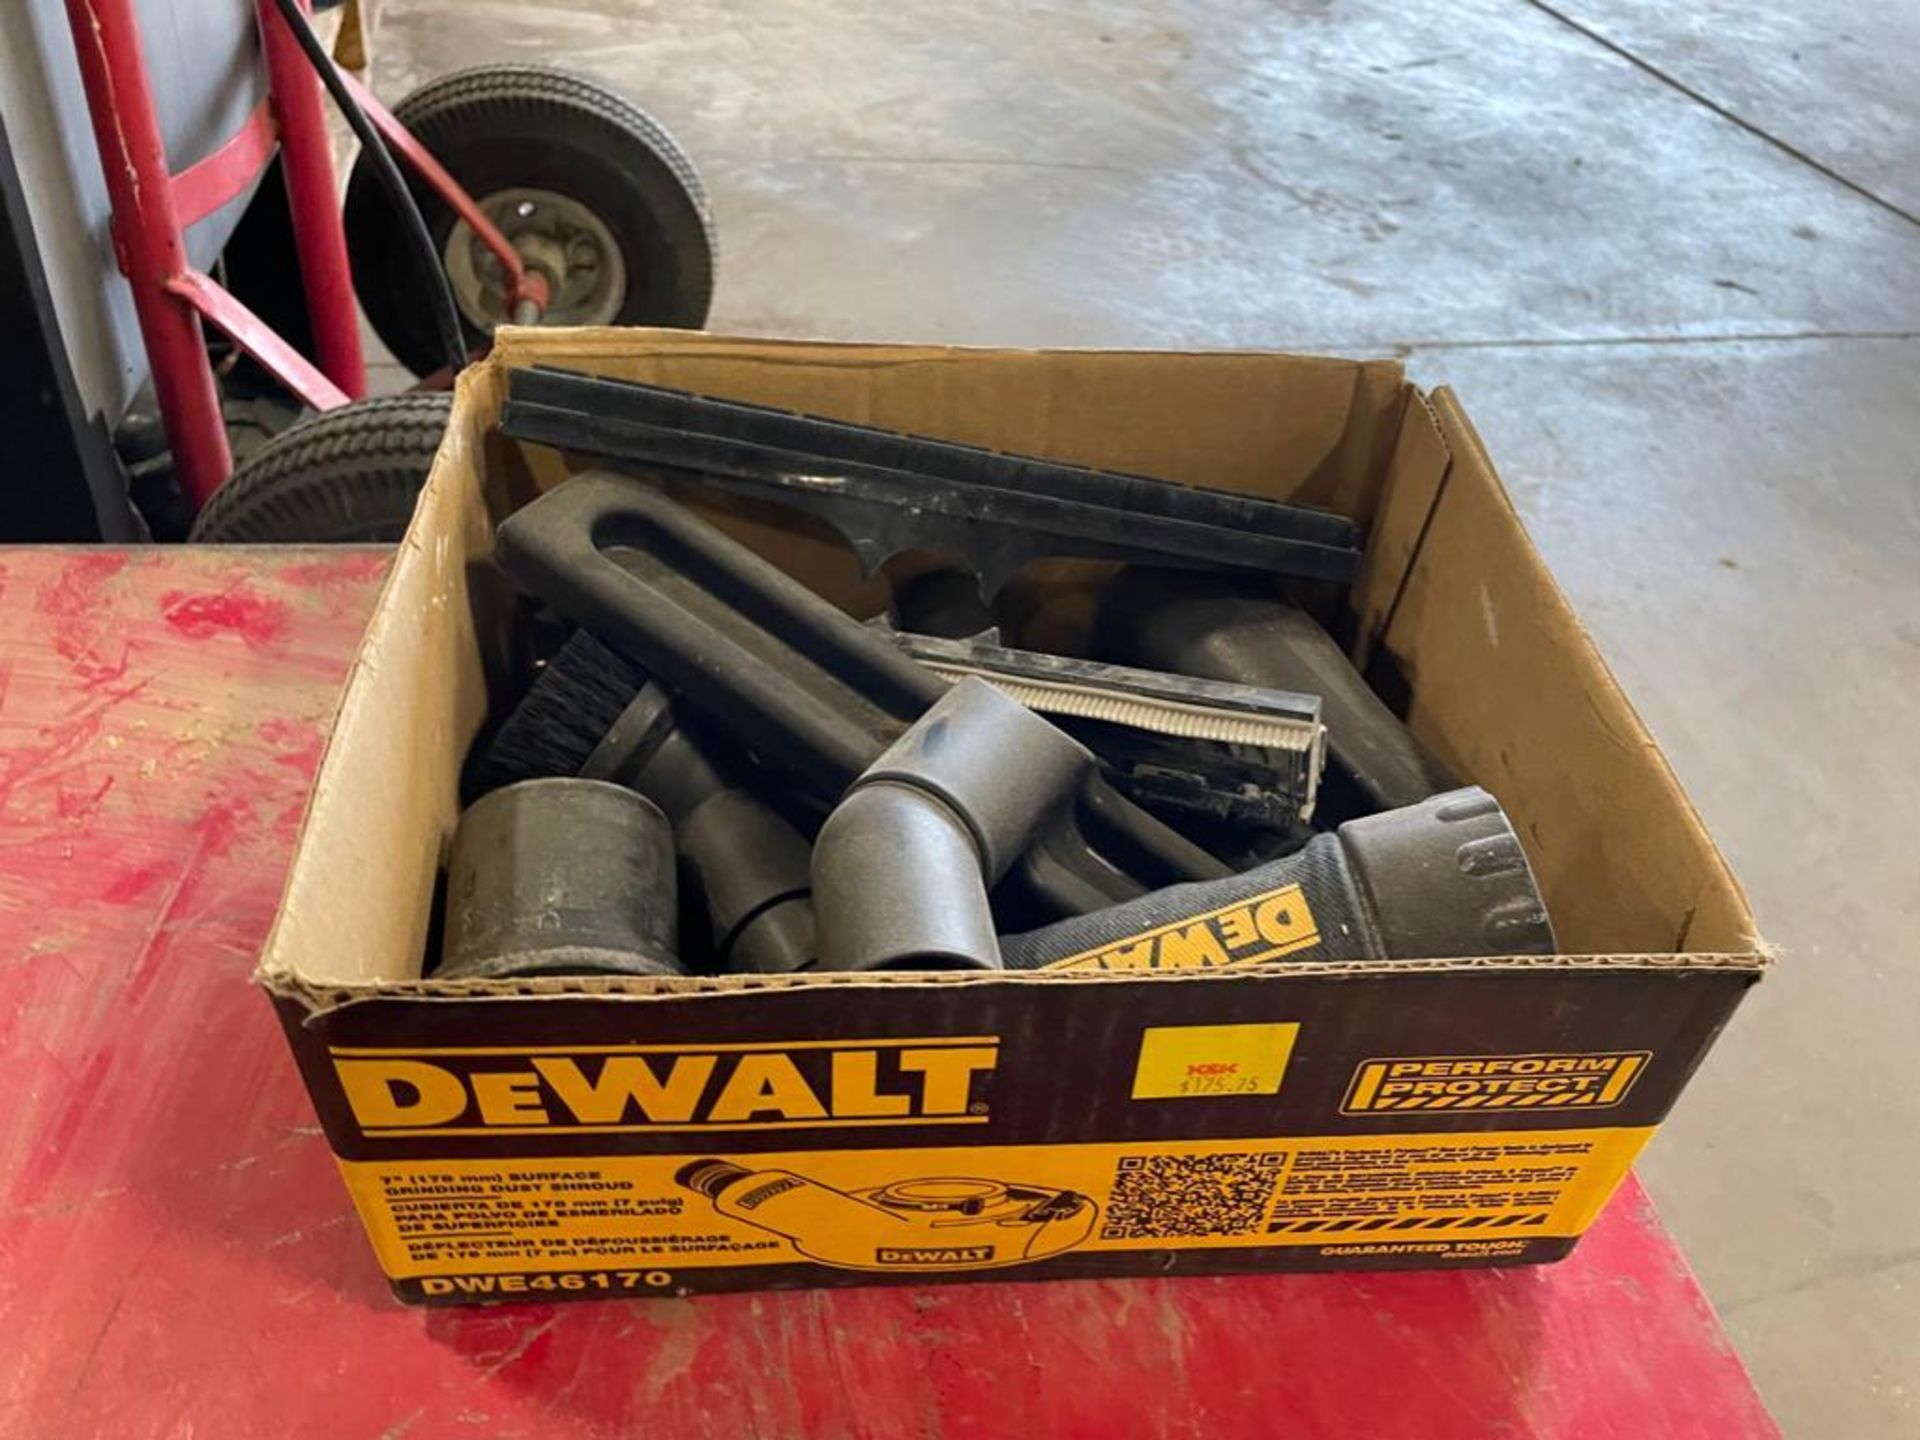 Miscellaneous DeWalt parts, chargers, bits, etc. Located in Hazelwood, MO - Image 2 of 14